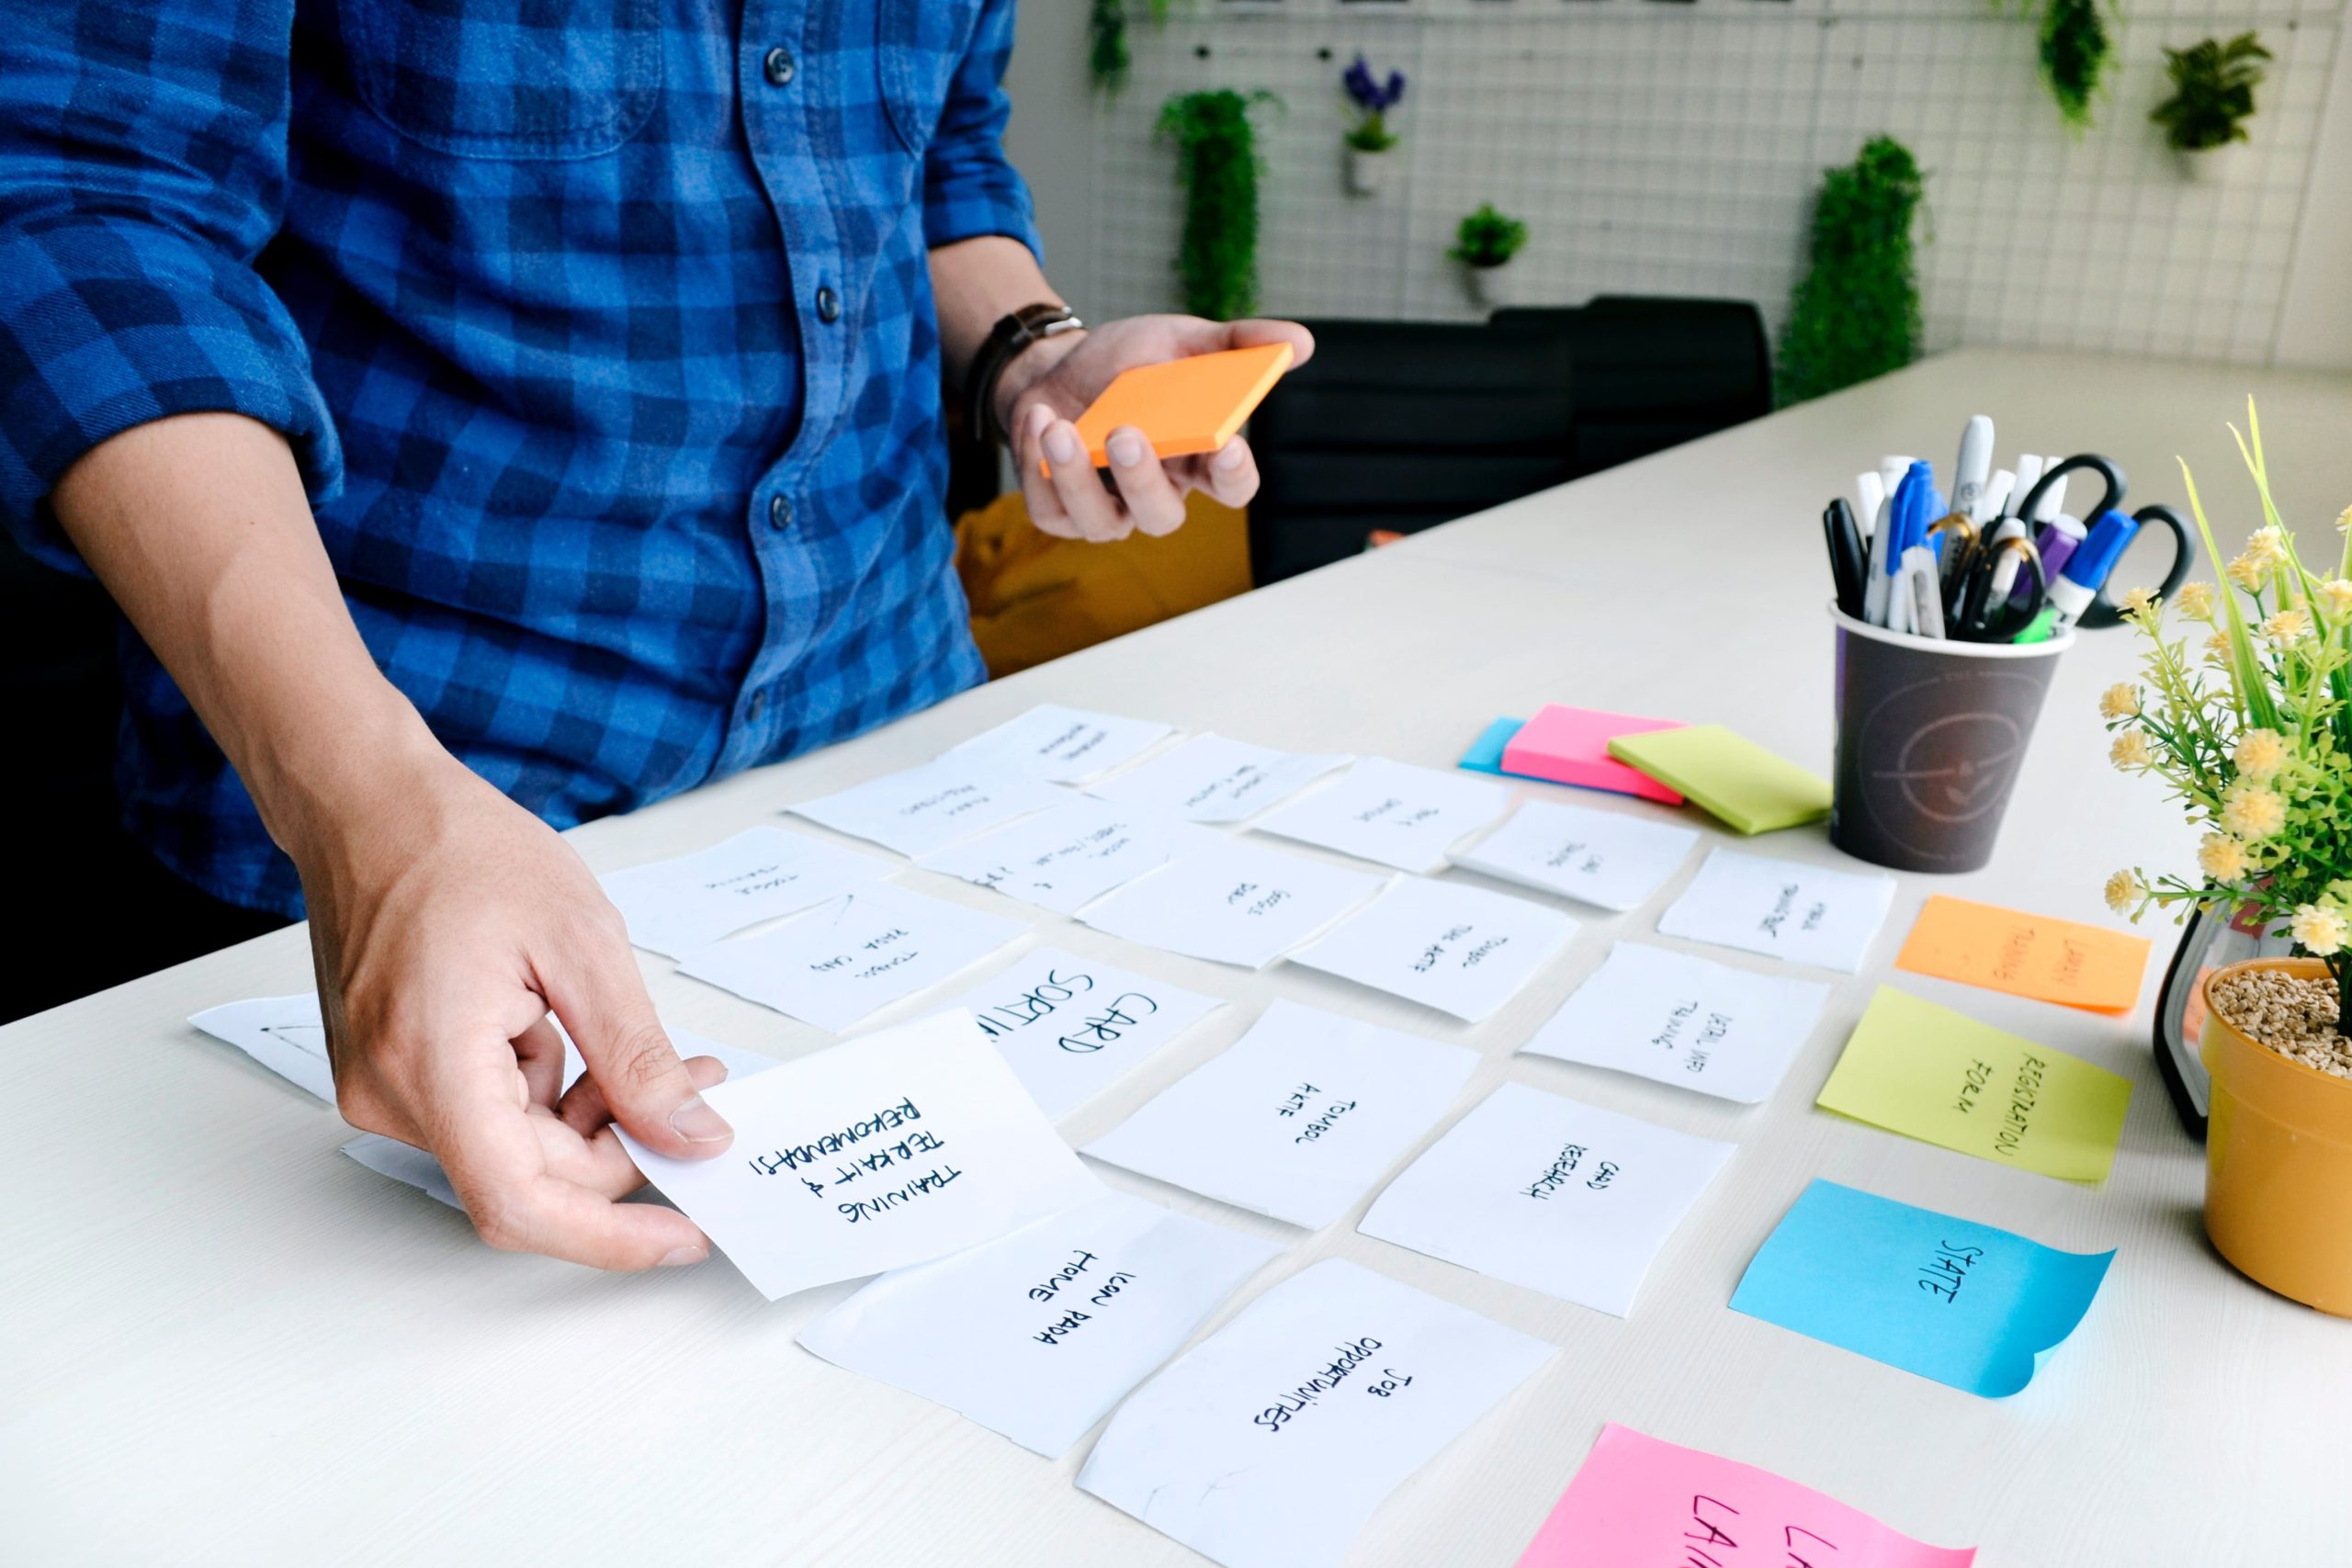 A person strategically placing sticky notes on a table, symbolizing the Agile methodology and thoughtful assessment of options for effective decision-making.